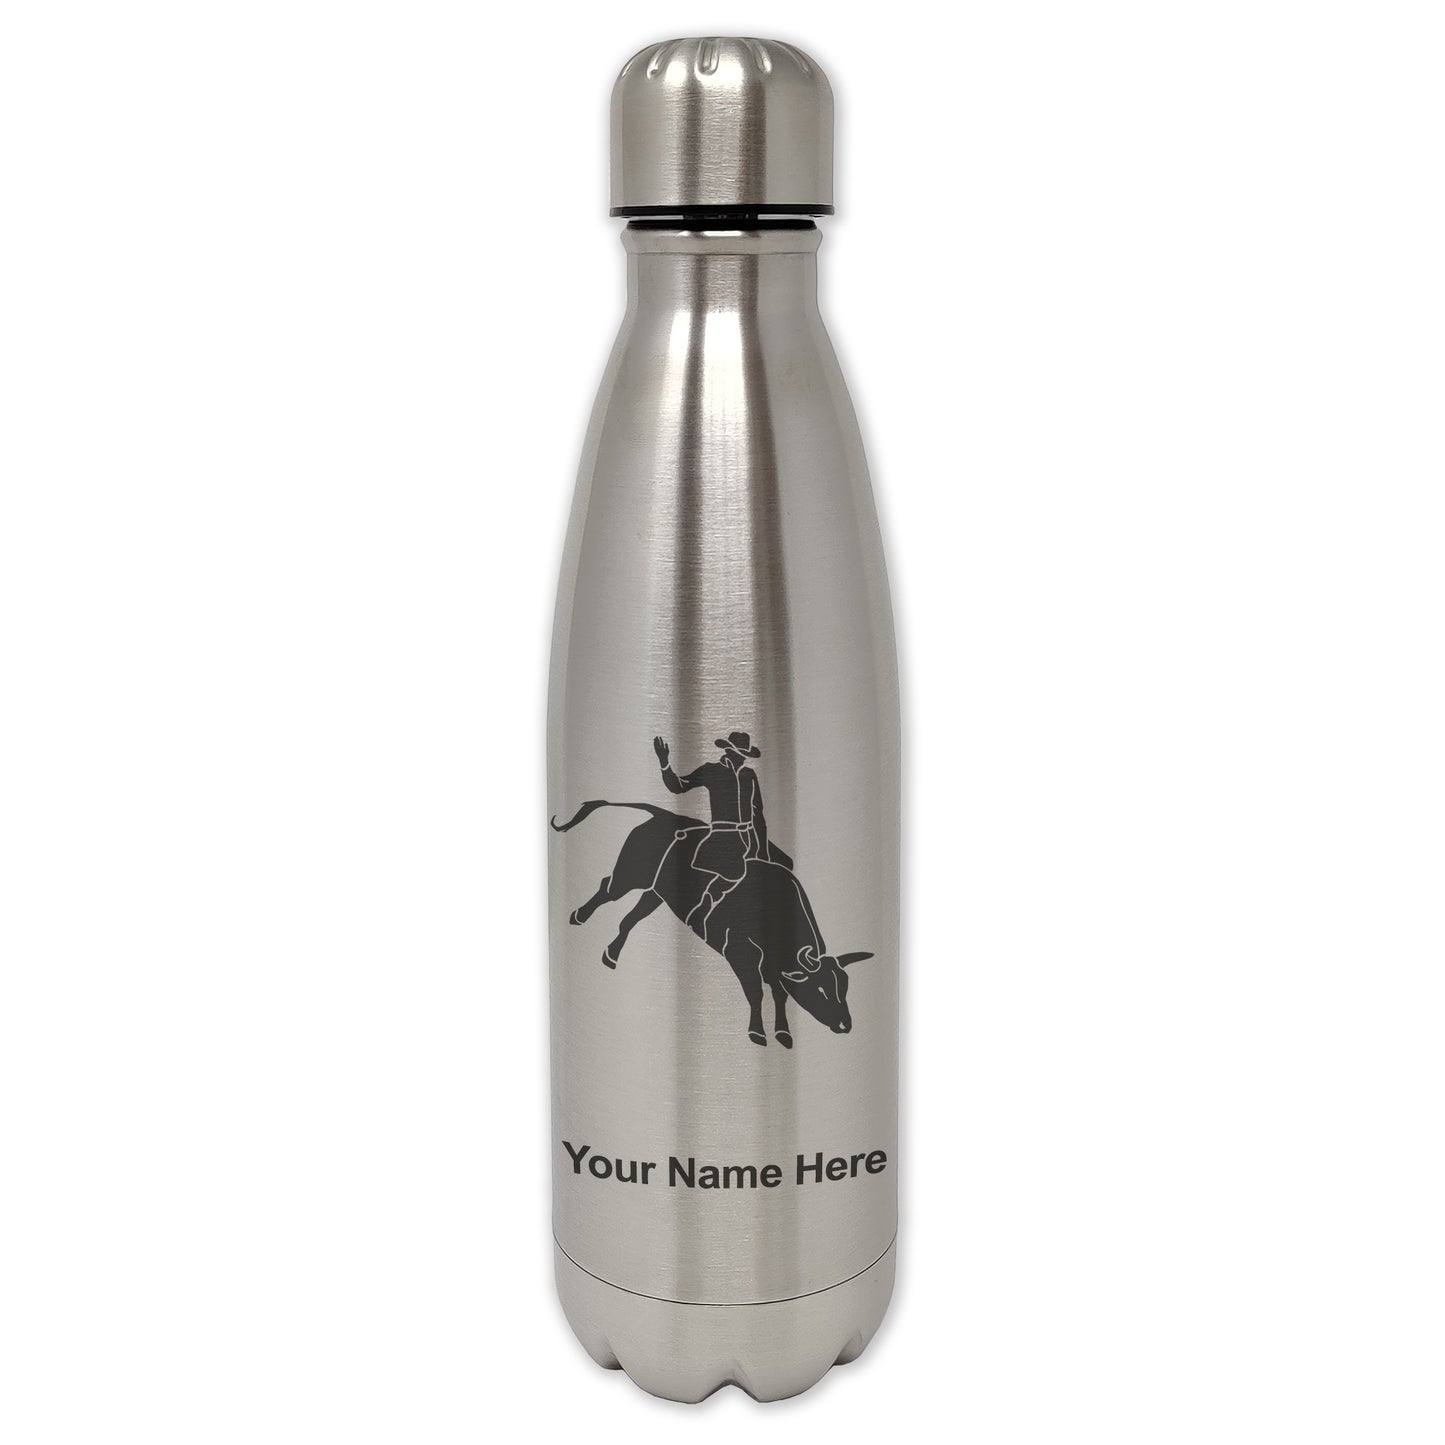 LaserGram Single Wall Water Bottle, Bull Rider Cowboy, Personalized Engraving Included